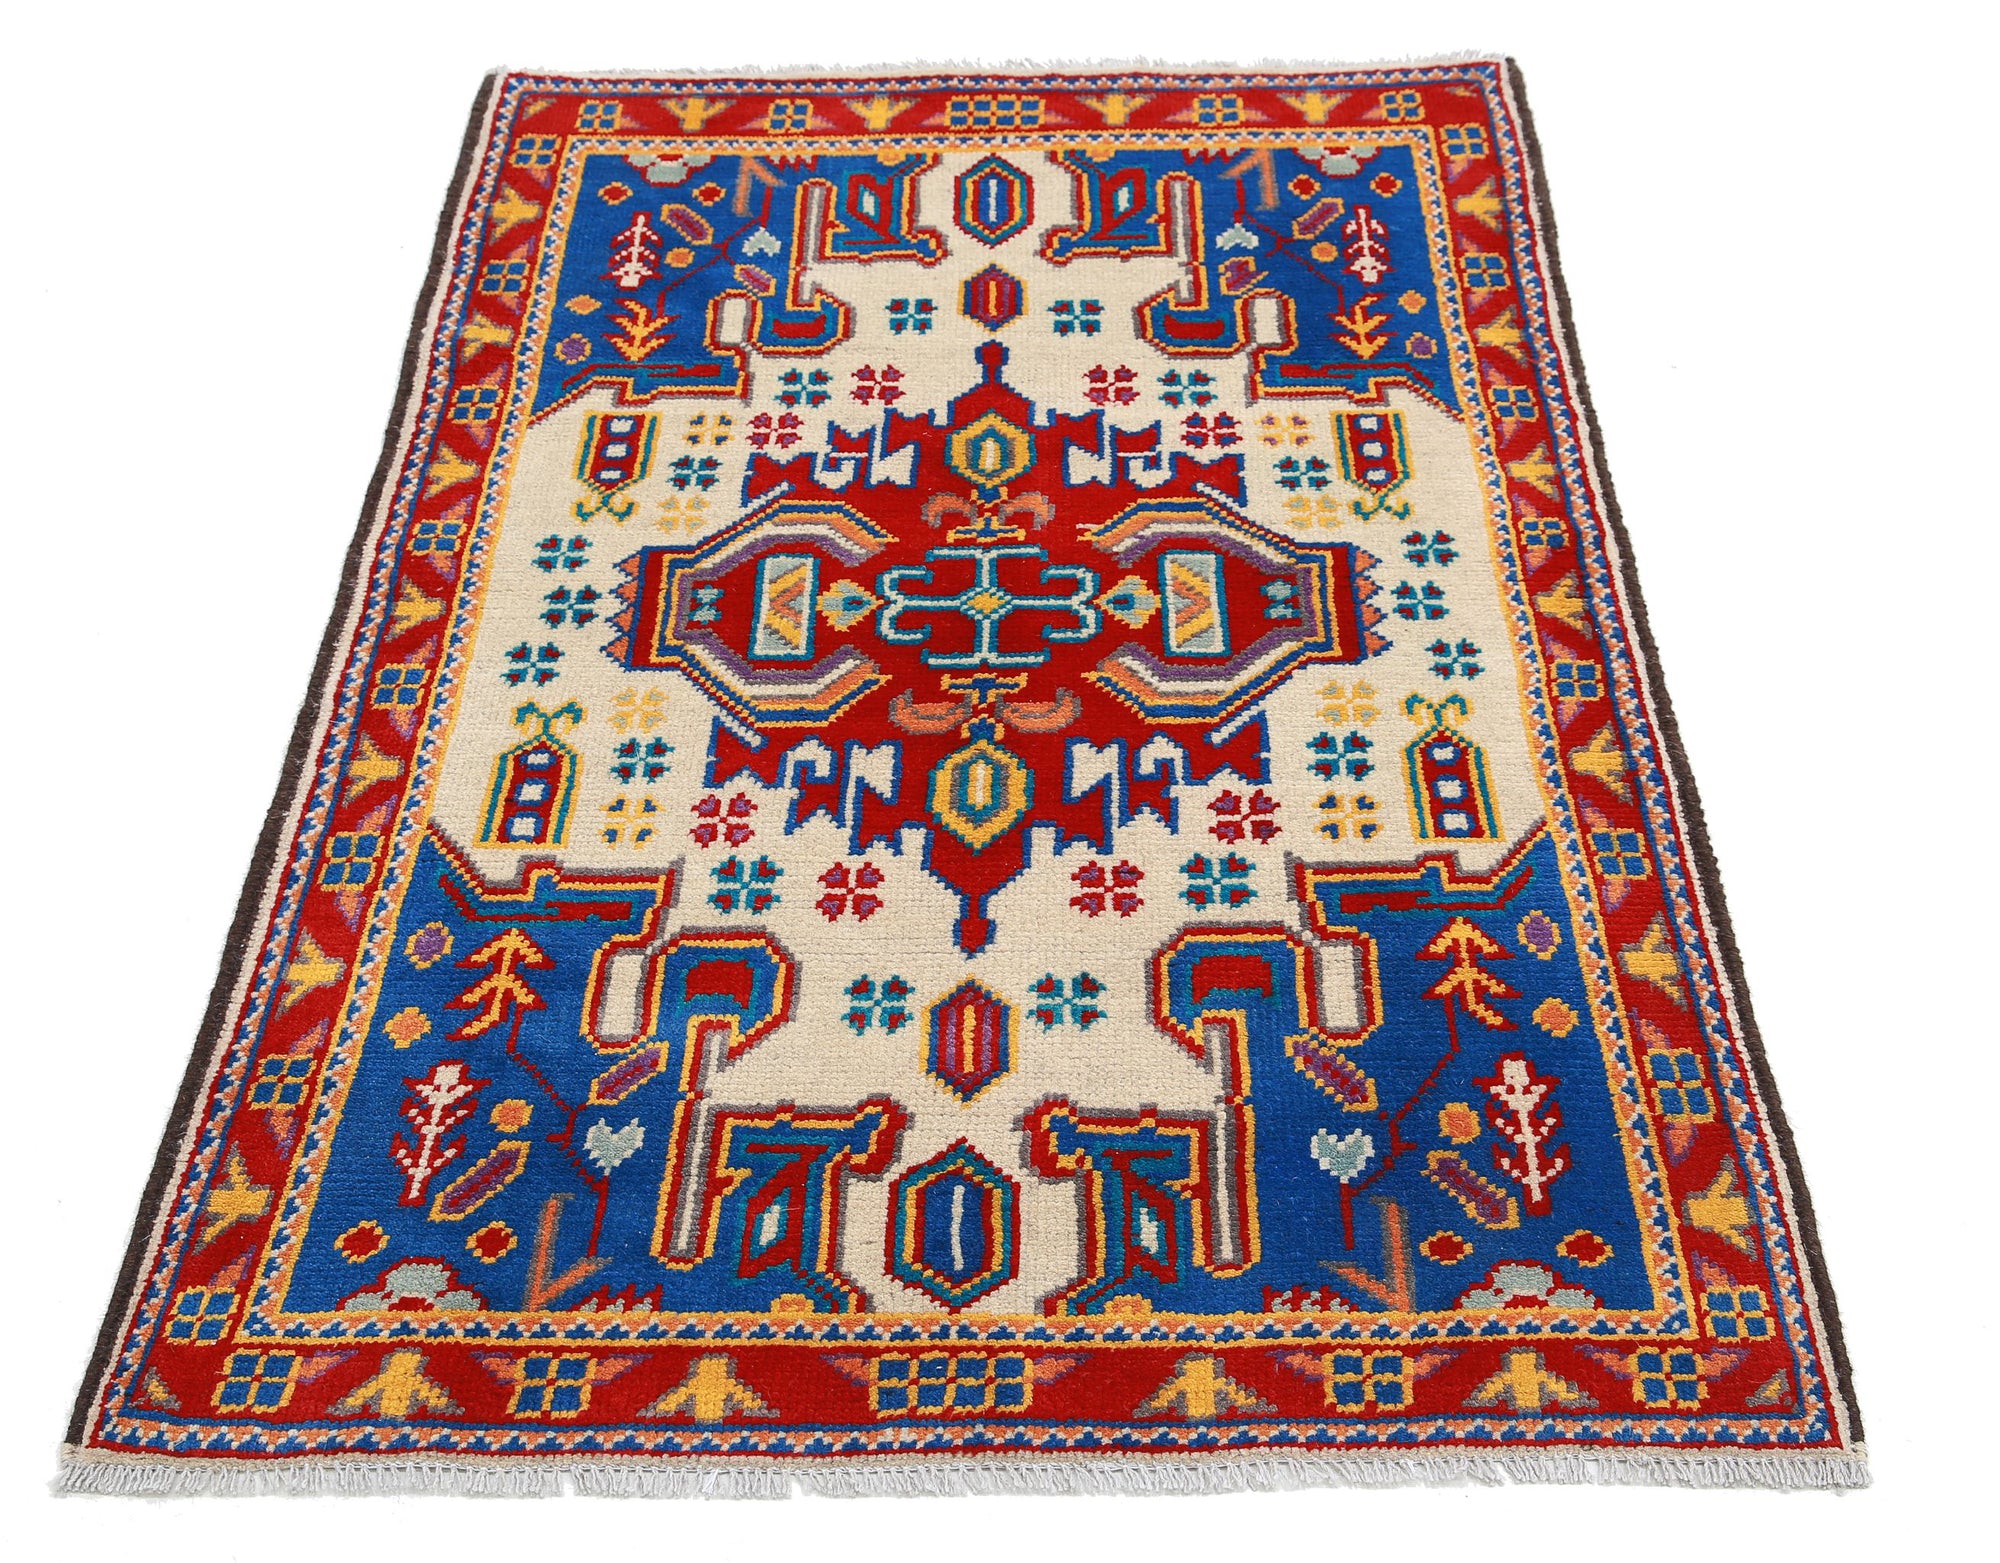 Revival-hand-knotted-qarghani-wool-rug-5014197-3.jpg